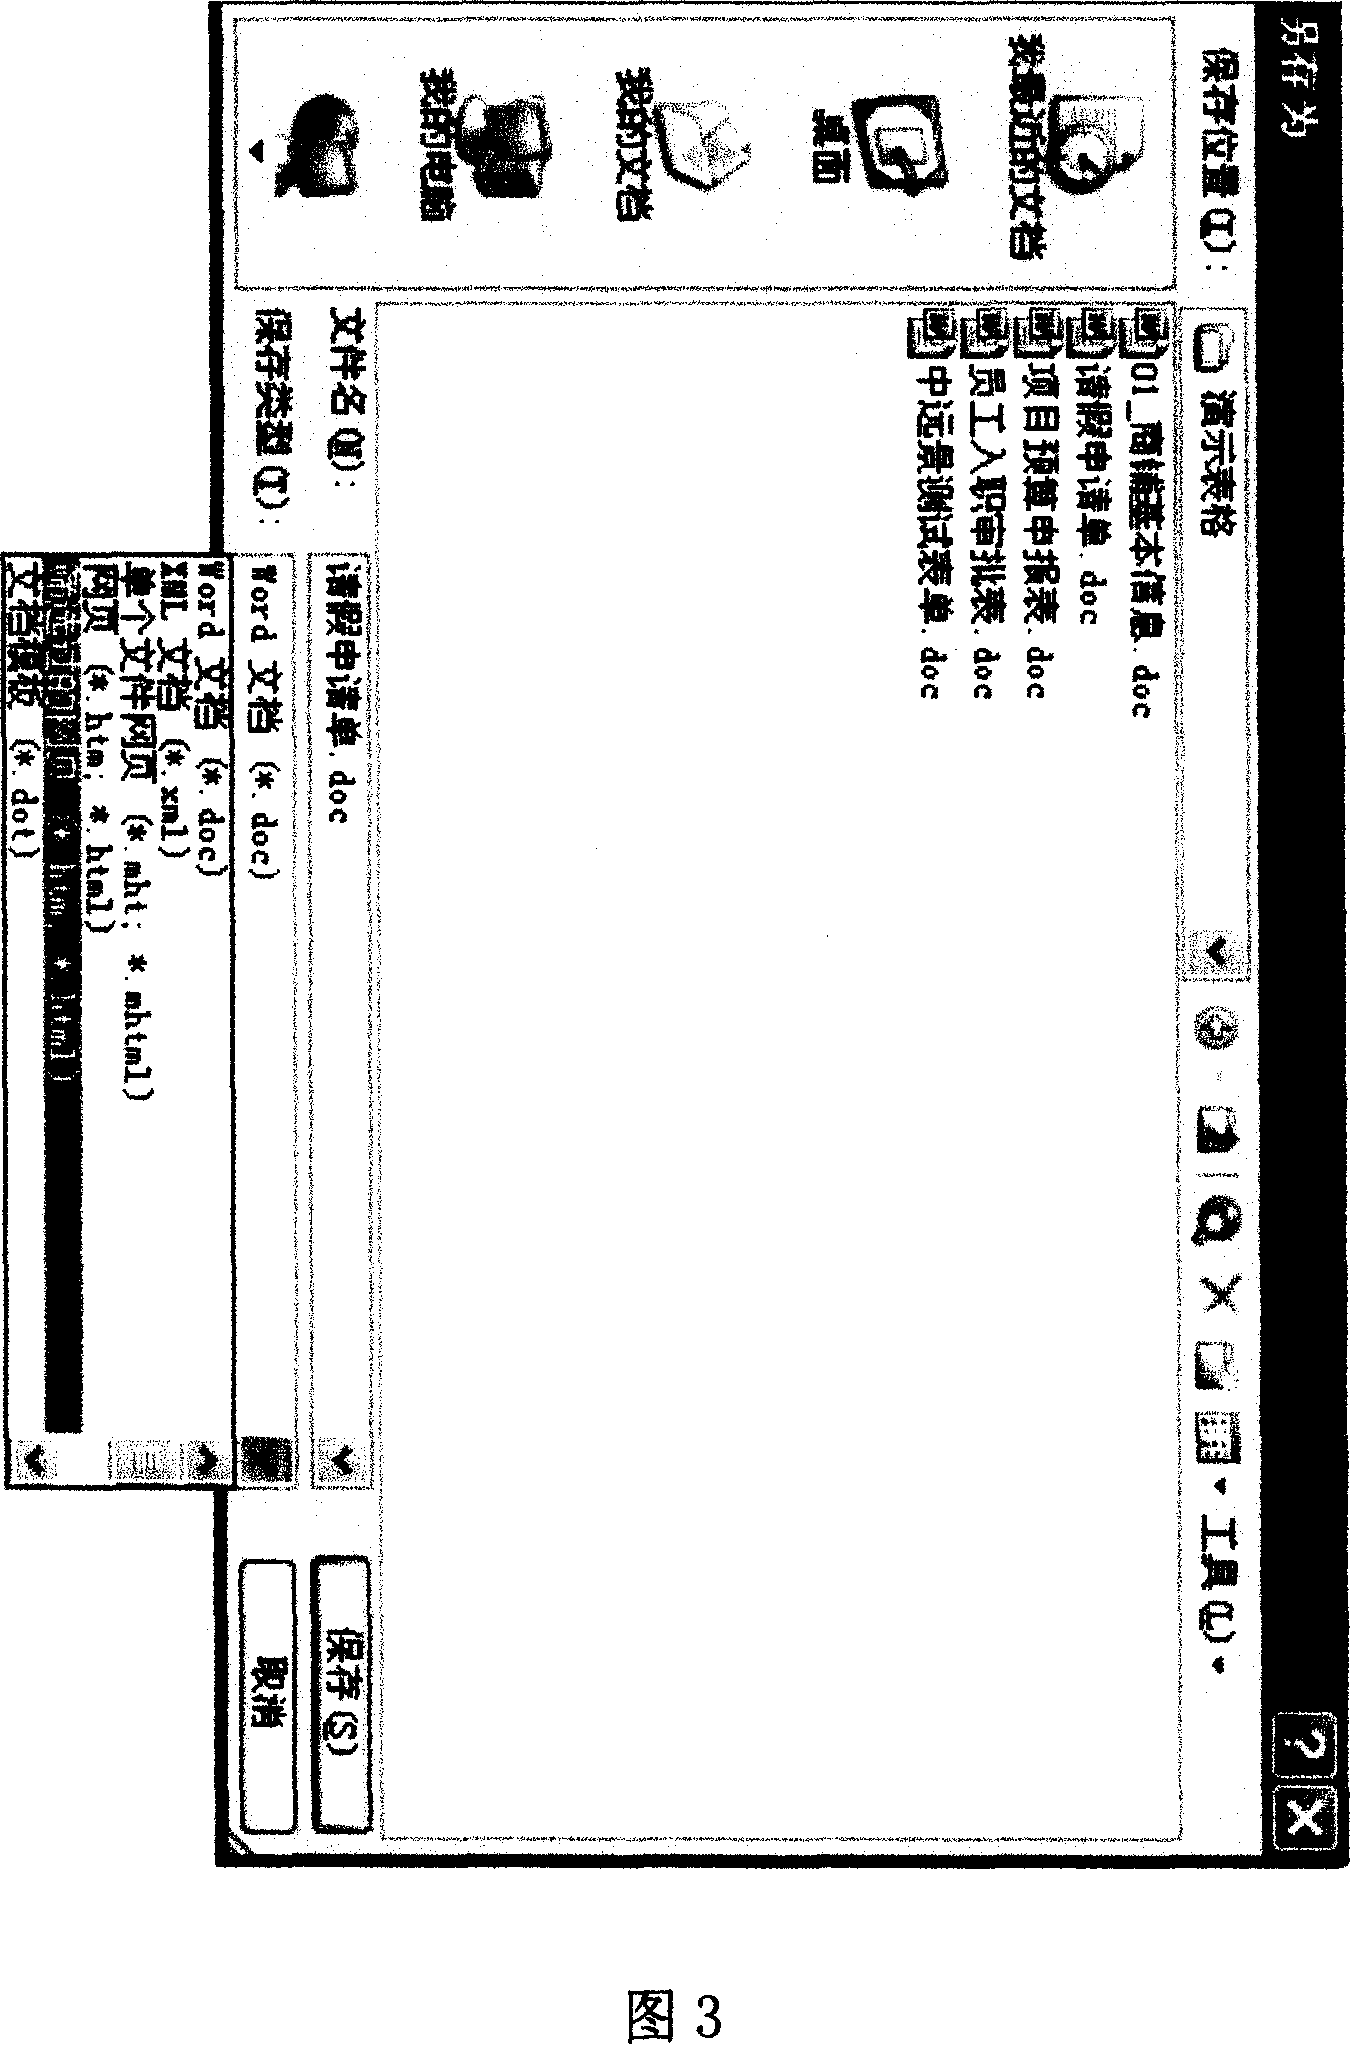 Method for quickly establishing web form and automatically establishing corresponding data table in database through Microsoft Word